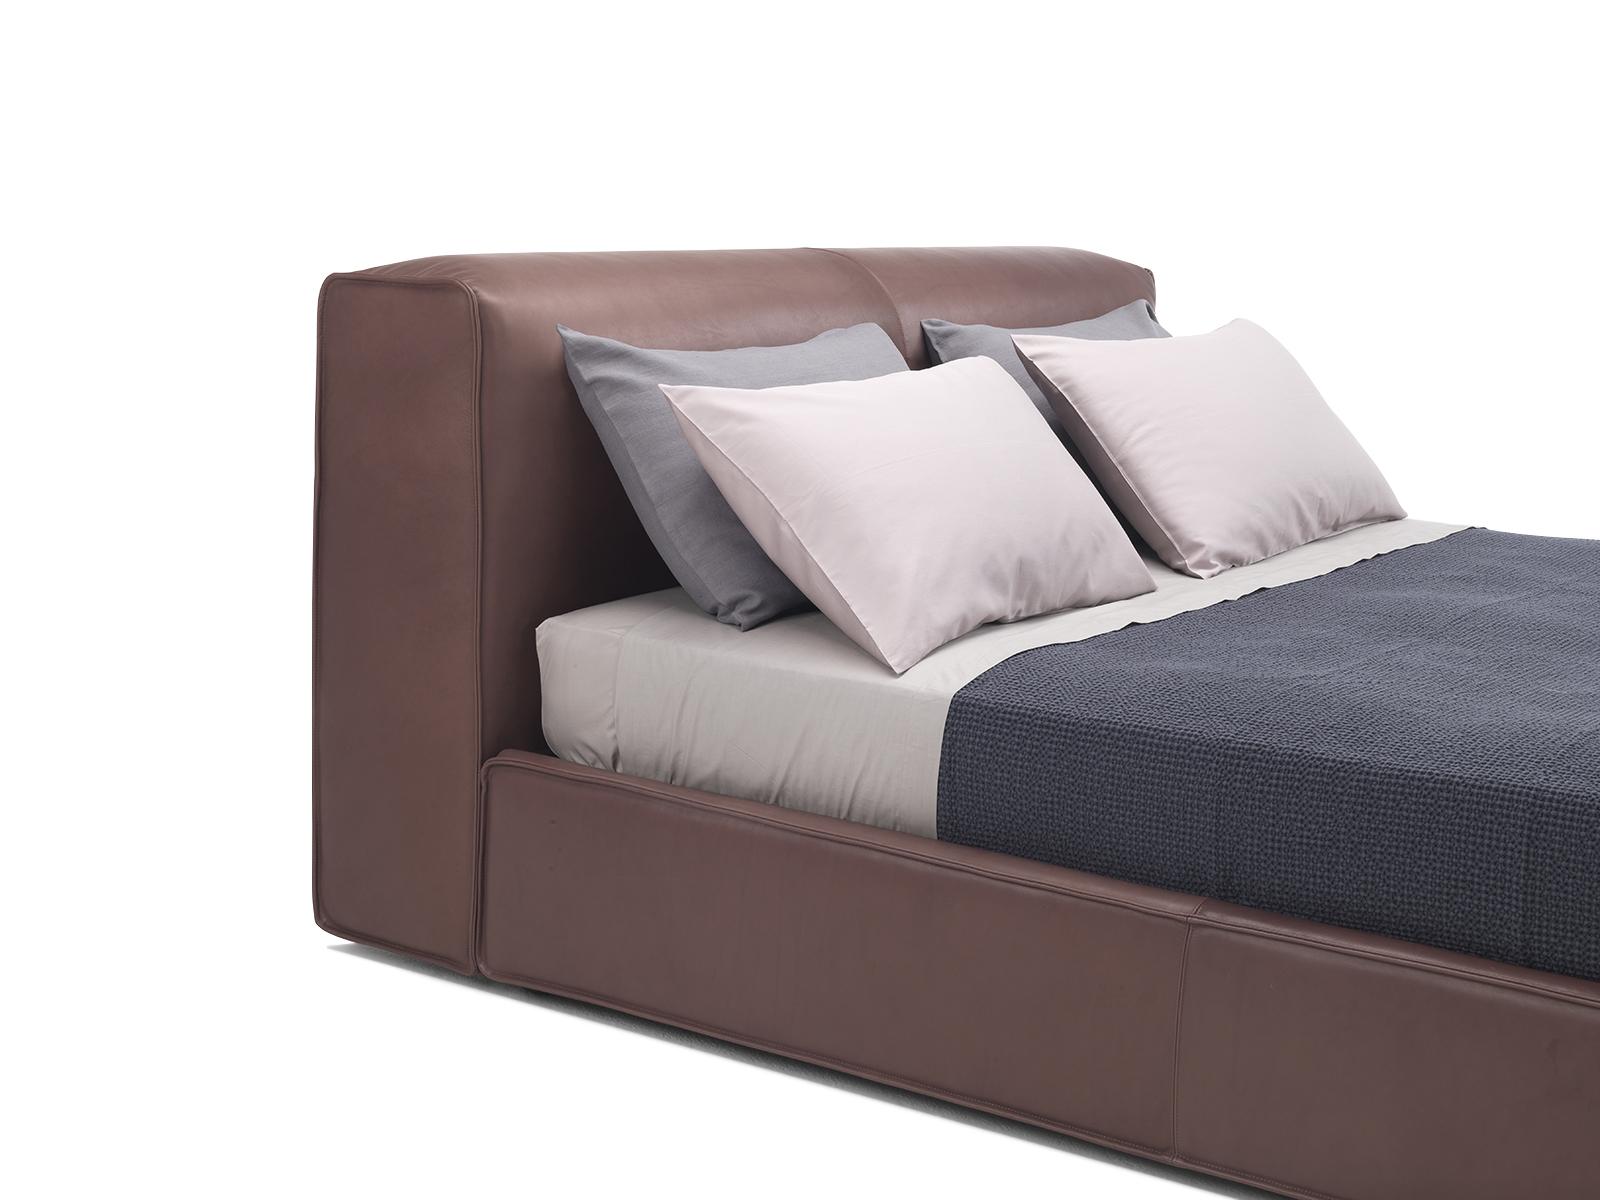 King size bed with generous size and strong shape. The thick headboard guarantees an undisputed comfort. Both the headboard and bed frame are in extraordinary Italian leather craftsmanship with turned stitching leather.

Note: This is a display